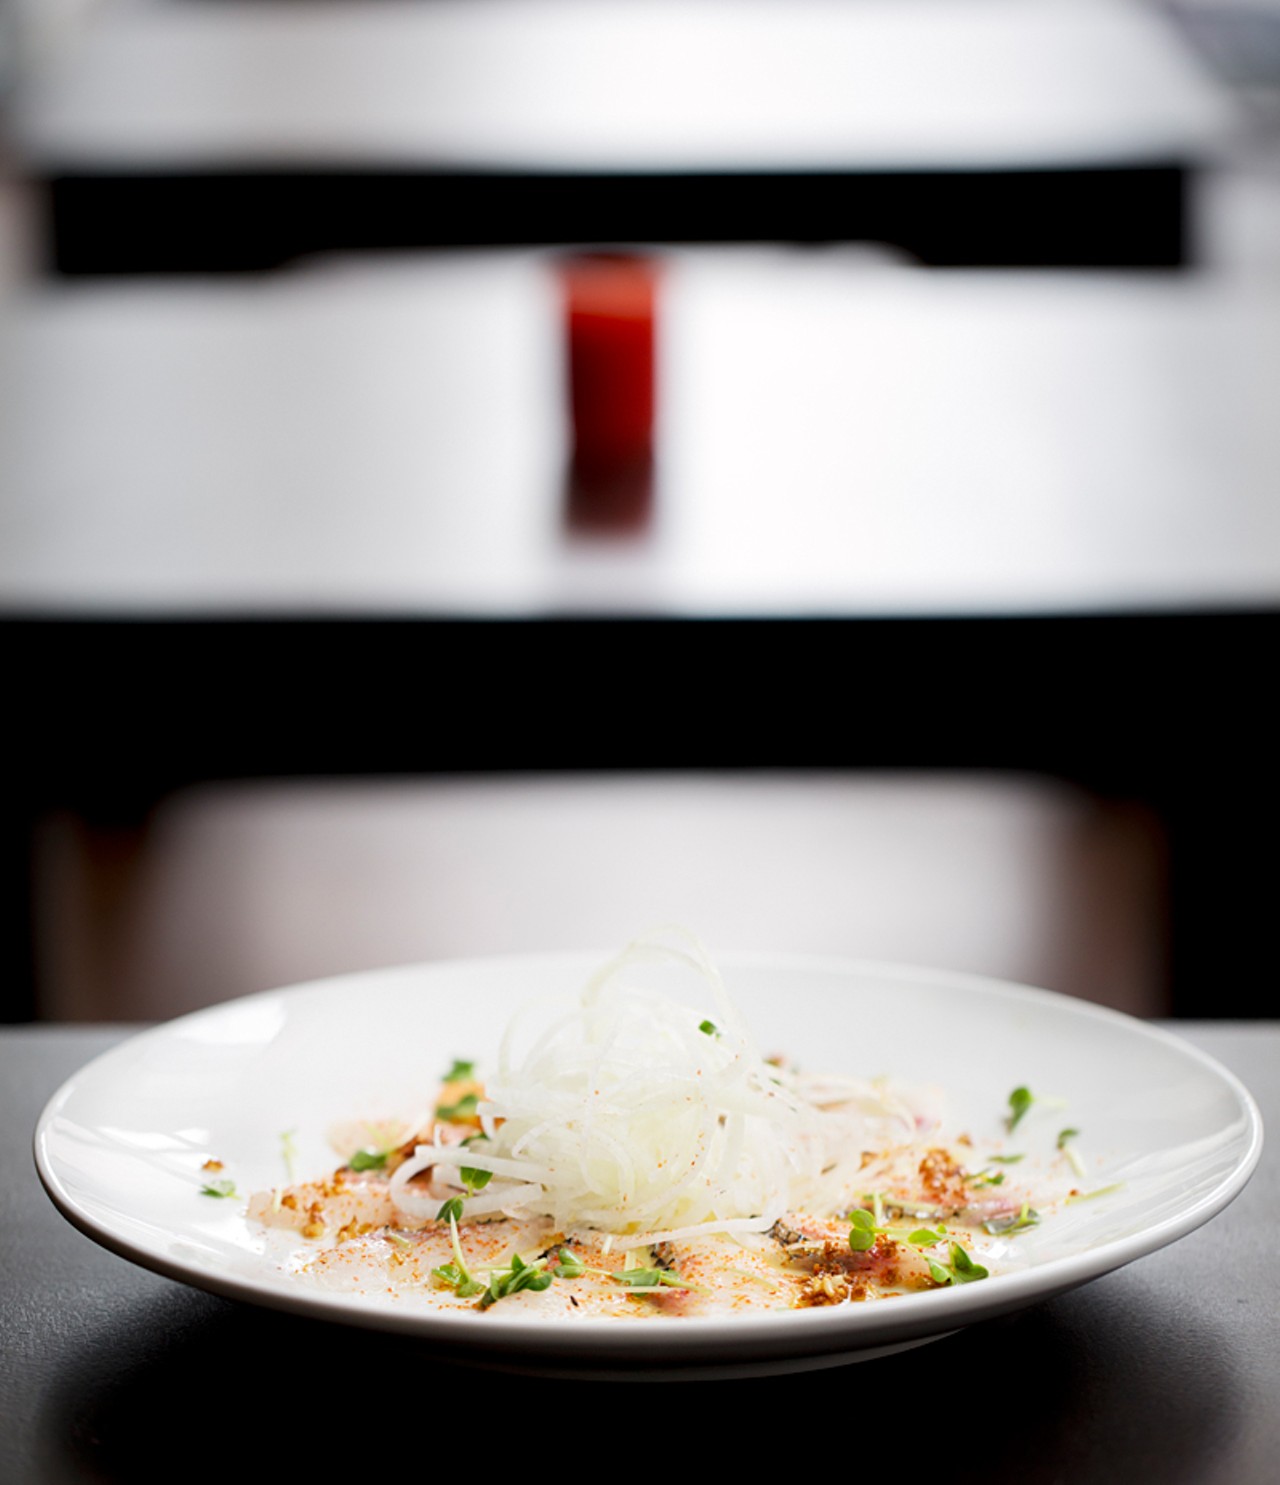 White fish carpaccio is dressed with olive oil, yuzu dressing, five-spice seasoning and garlic chips.